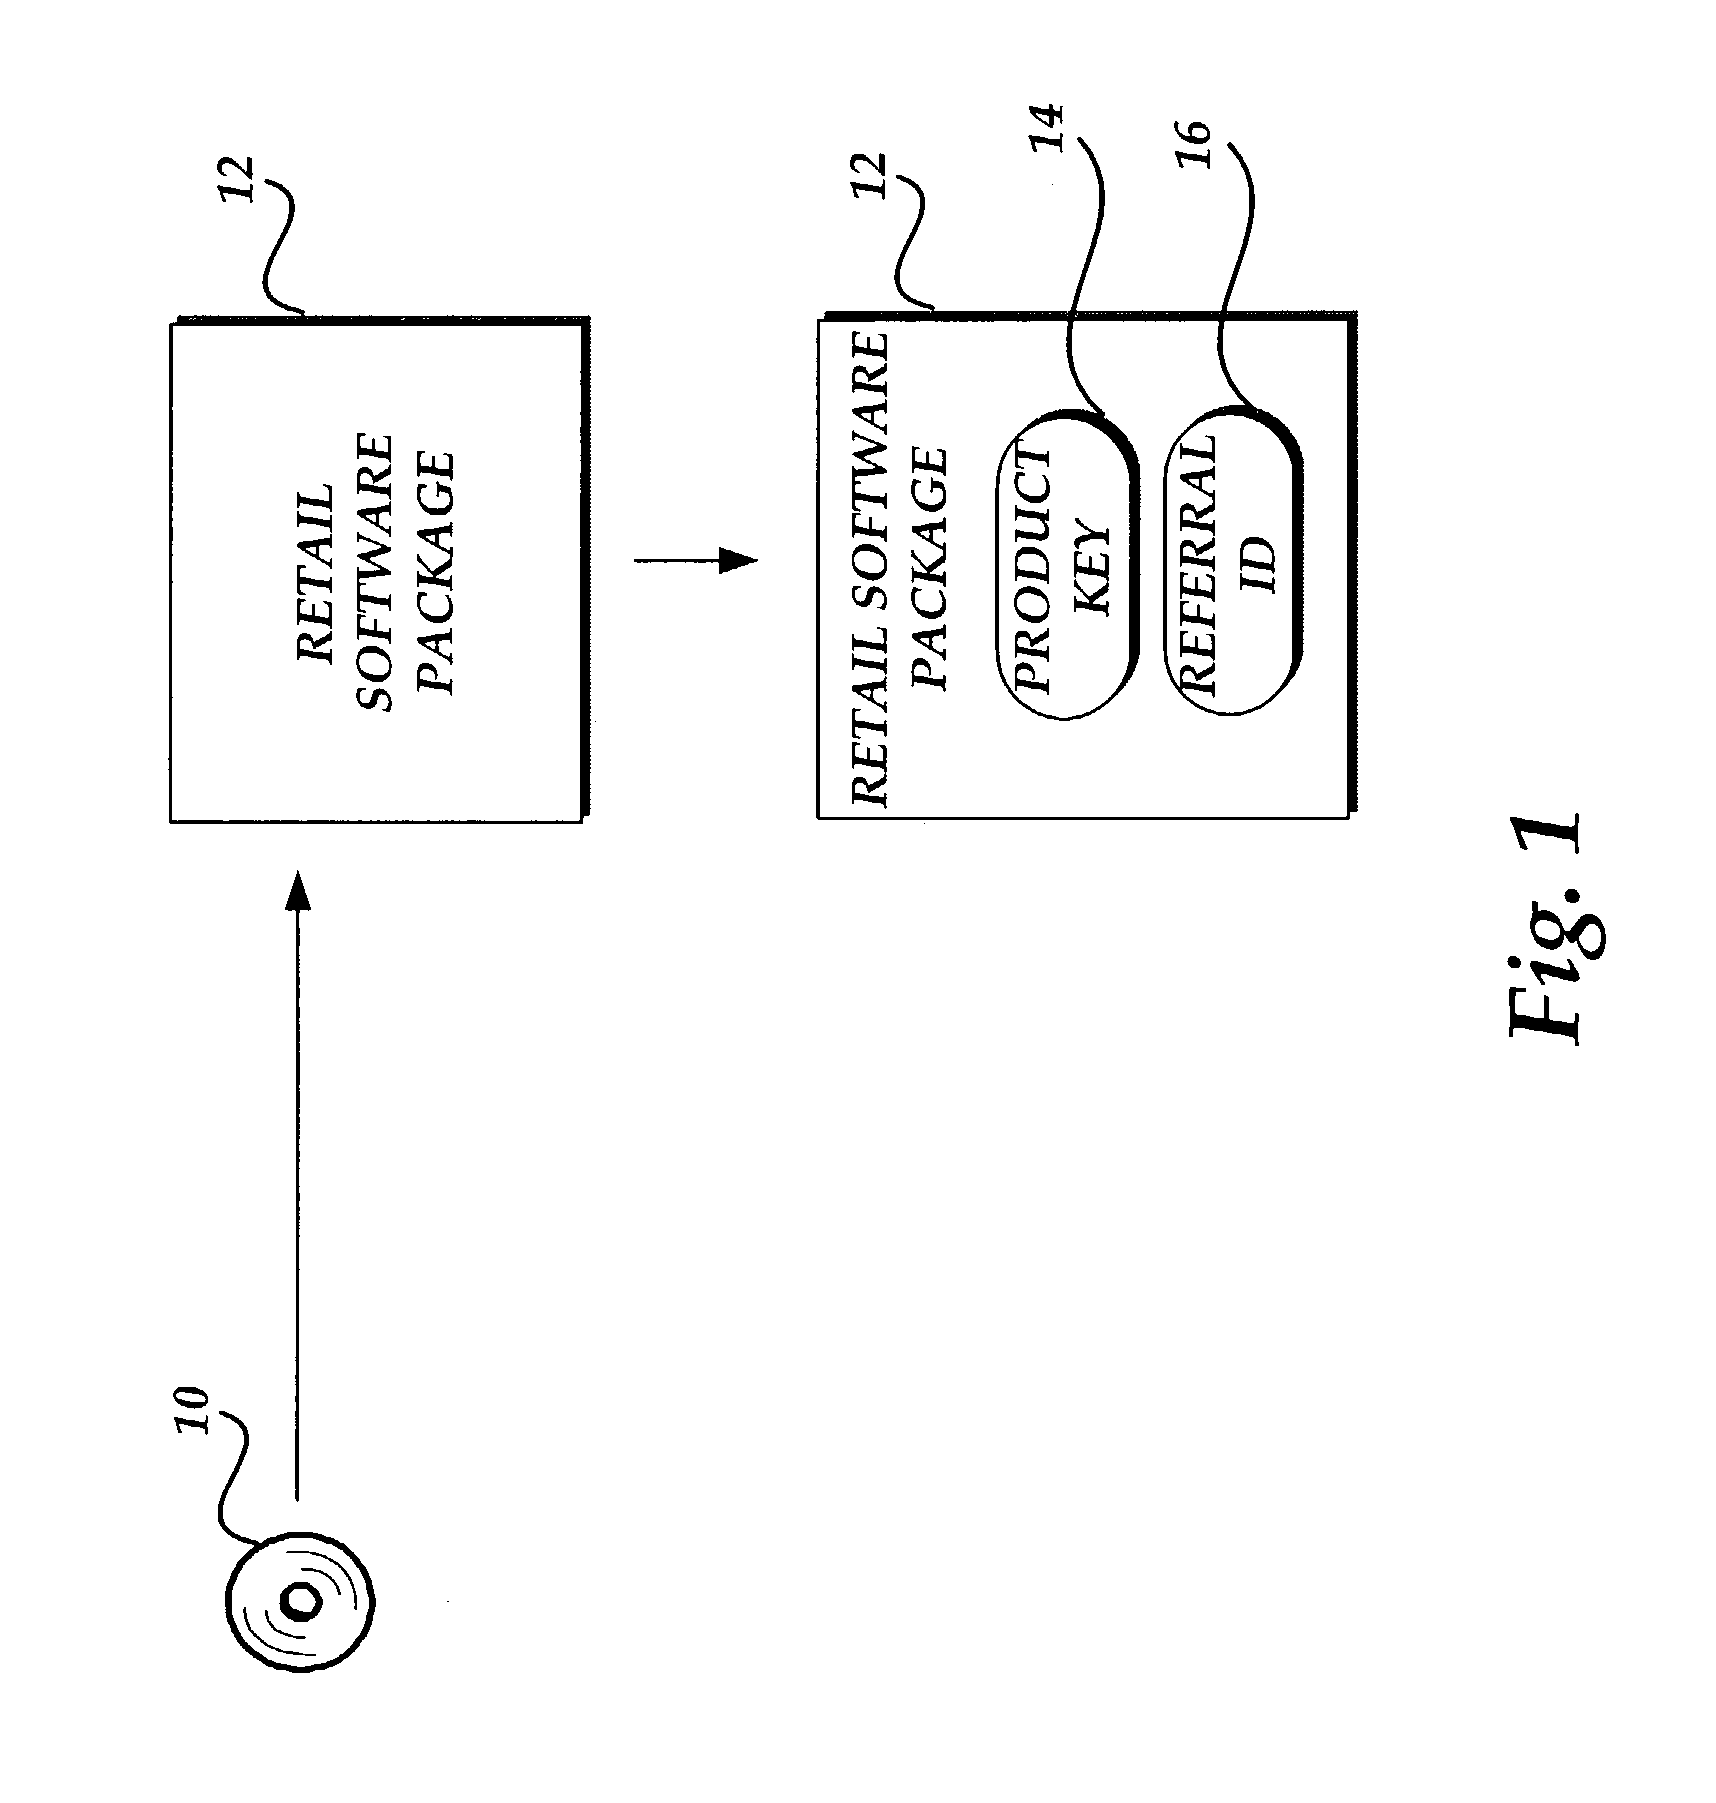 Method, system, apparatus, and computer-readable medium for tracking referrals and product sell-through